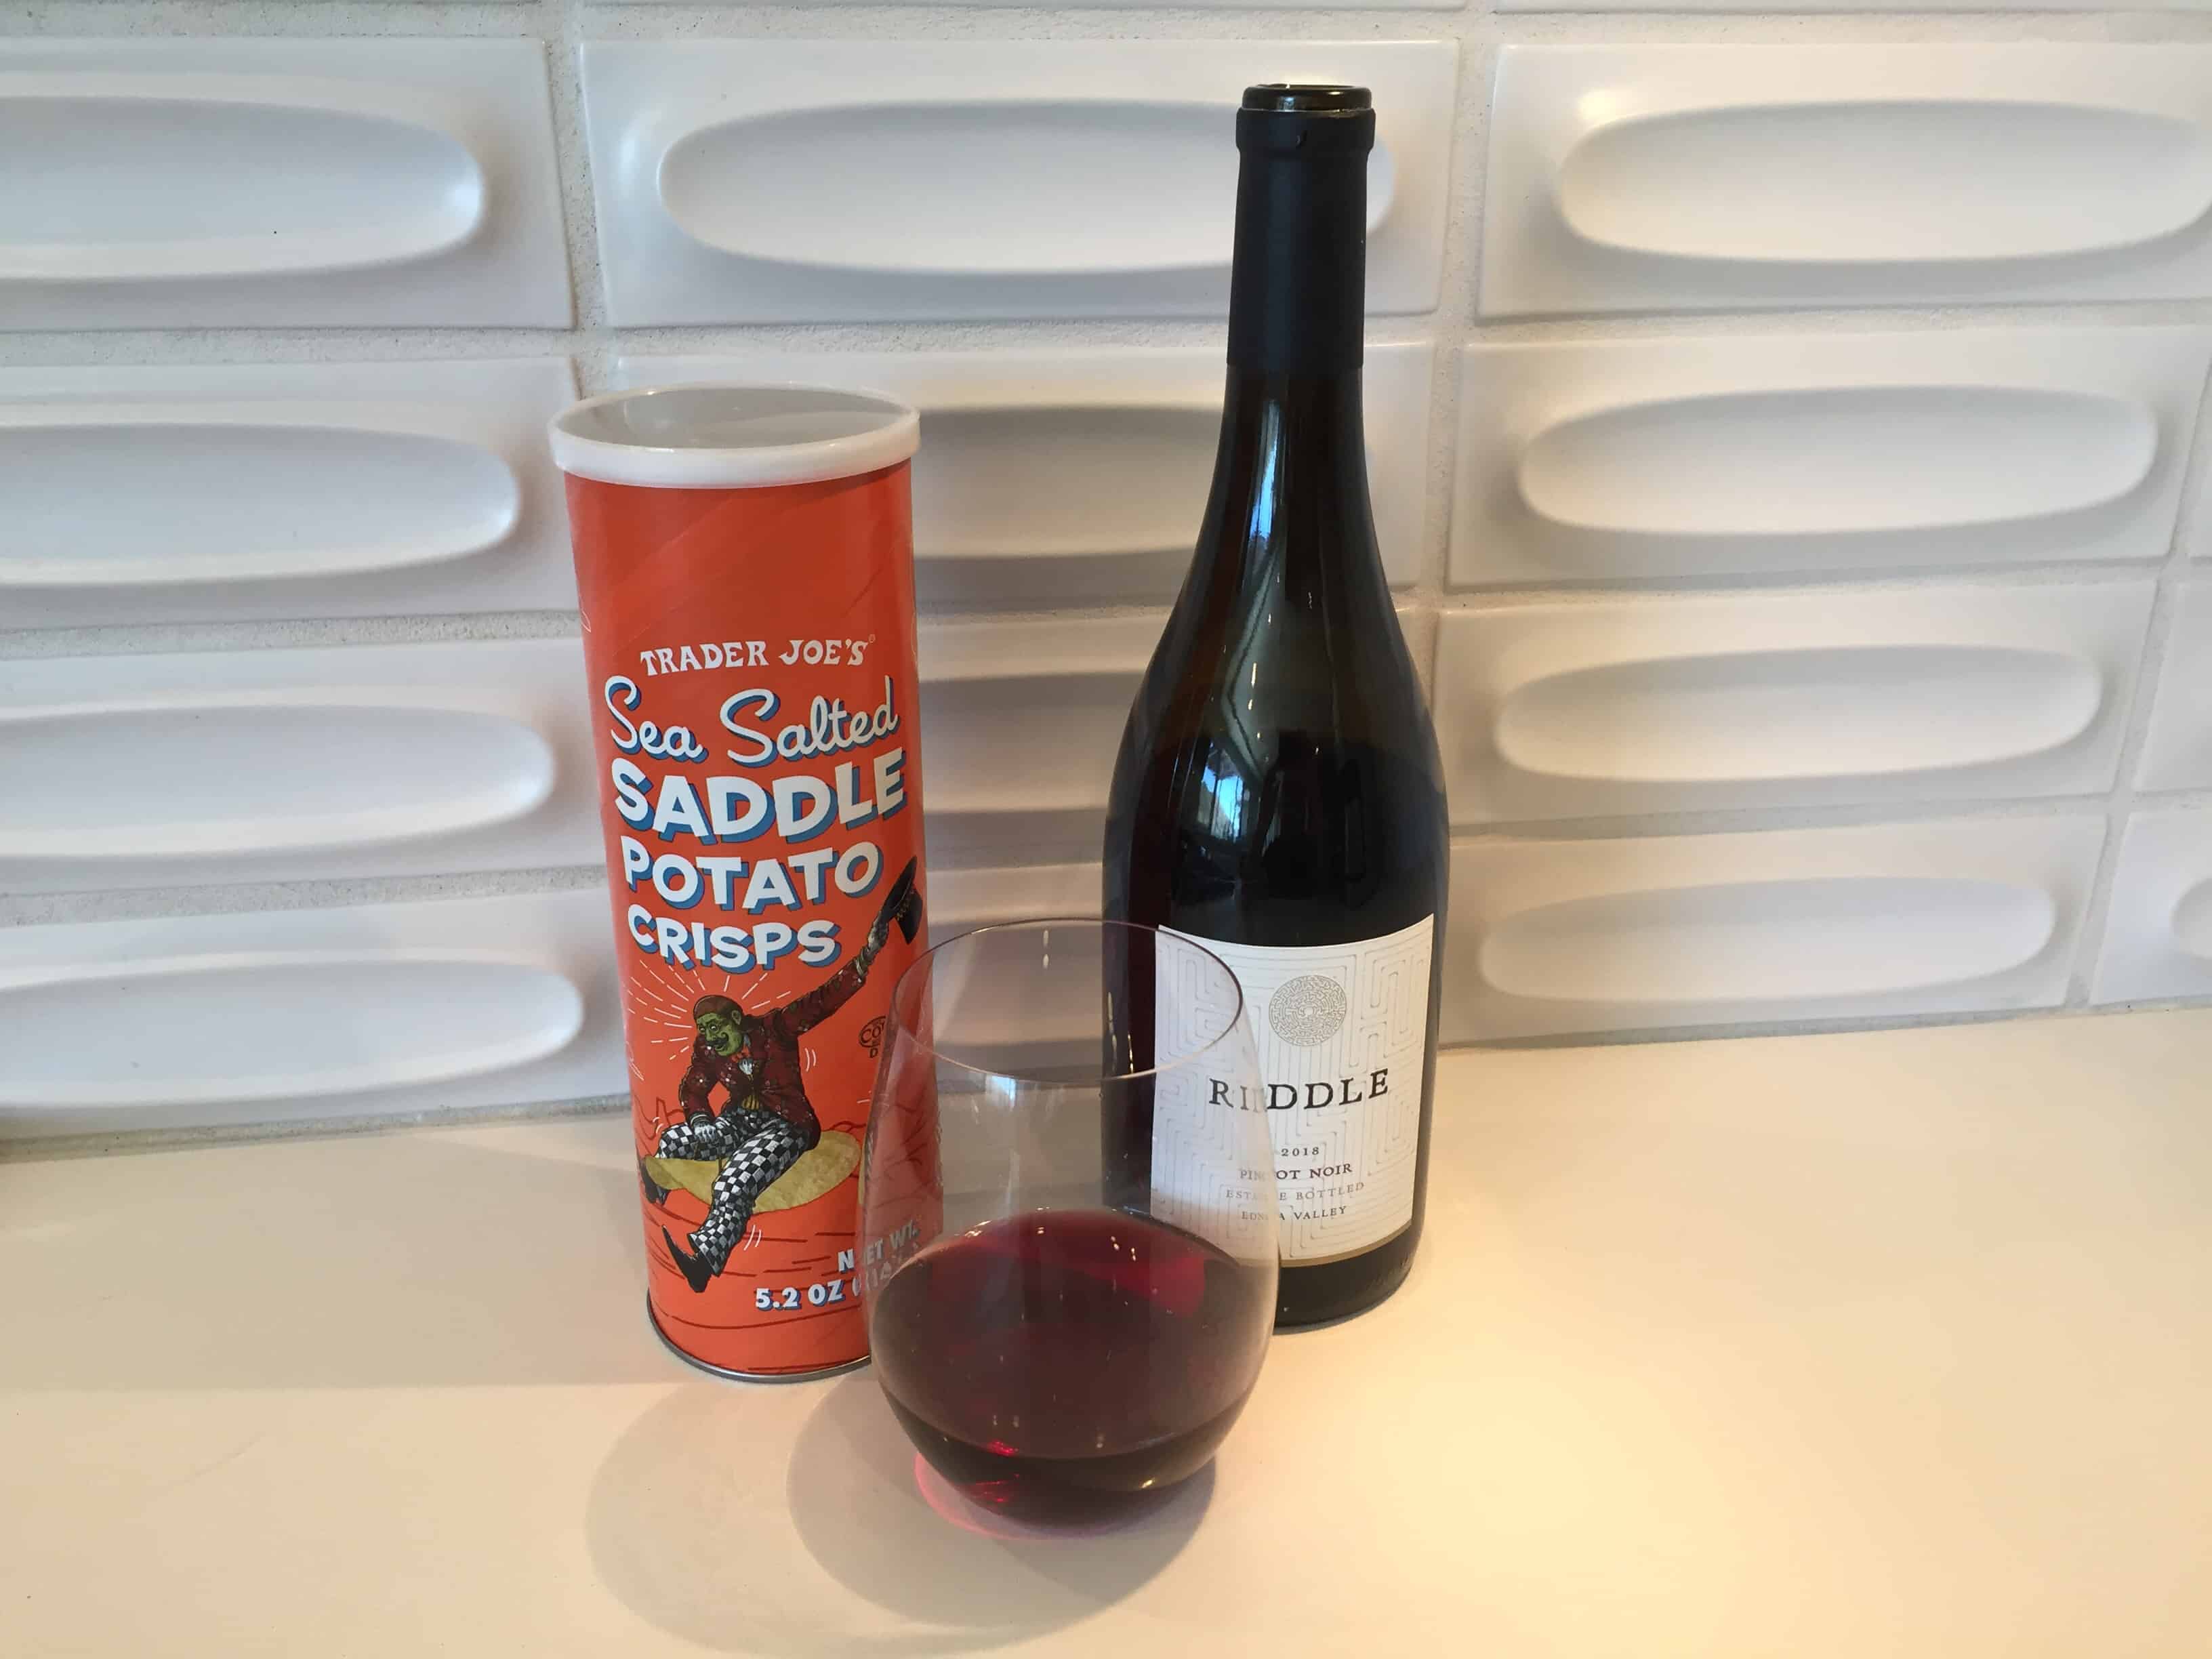 Bottle of $6.99 Riddle 2018 Pinot Noir and a sleeve of TJ's Pringles knock off - both delicious